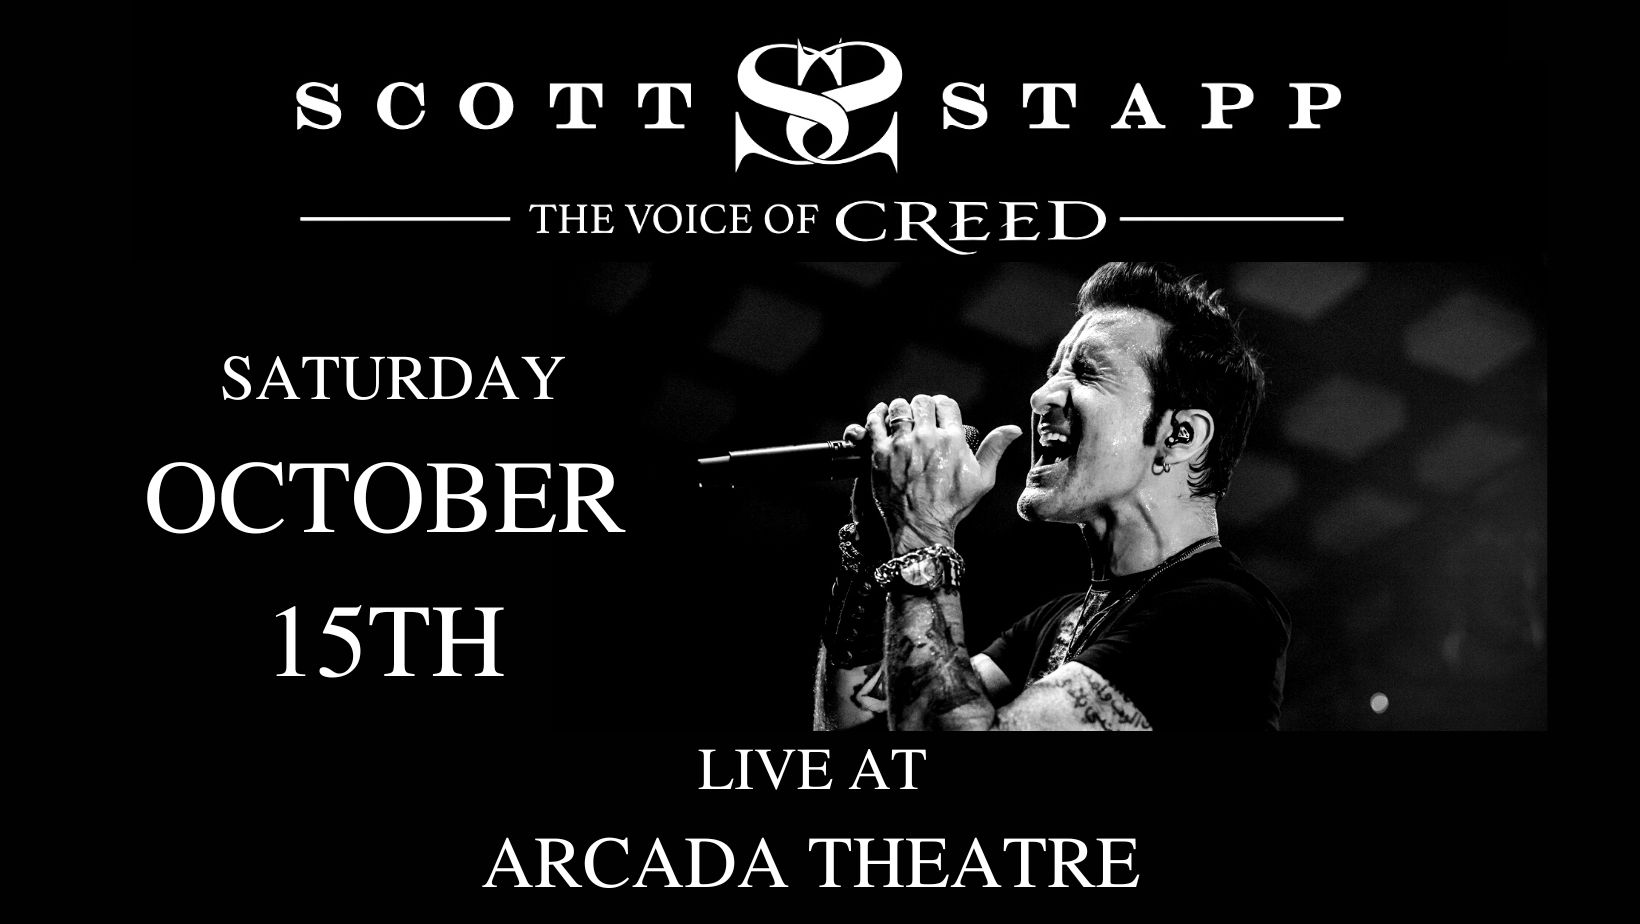 Scott Stapp Voice of Creed Live at The Arcada Theatre, Saint Charles- Saturday, October 15th, St. Charles, Illinois, United States